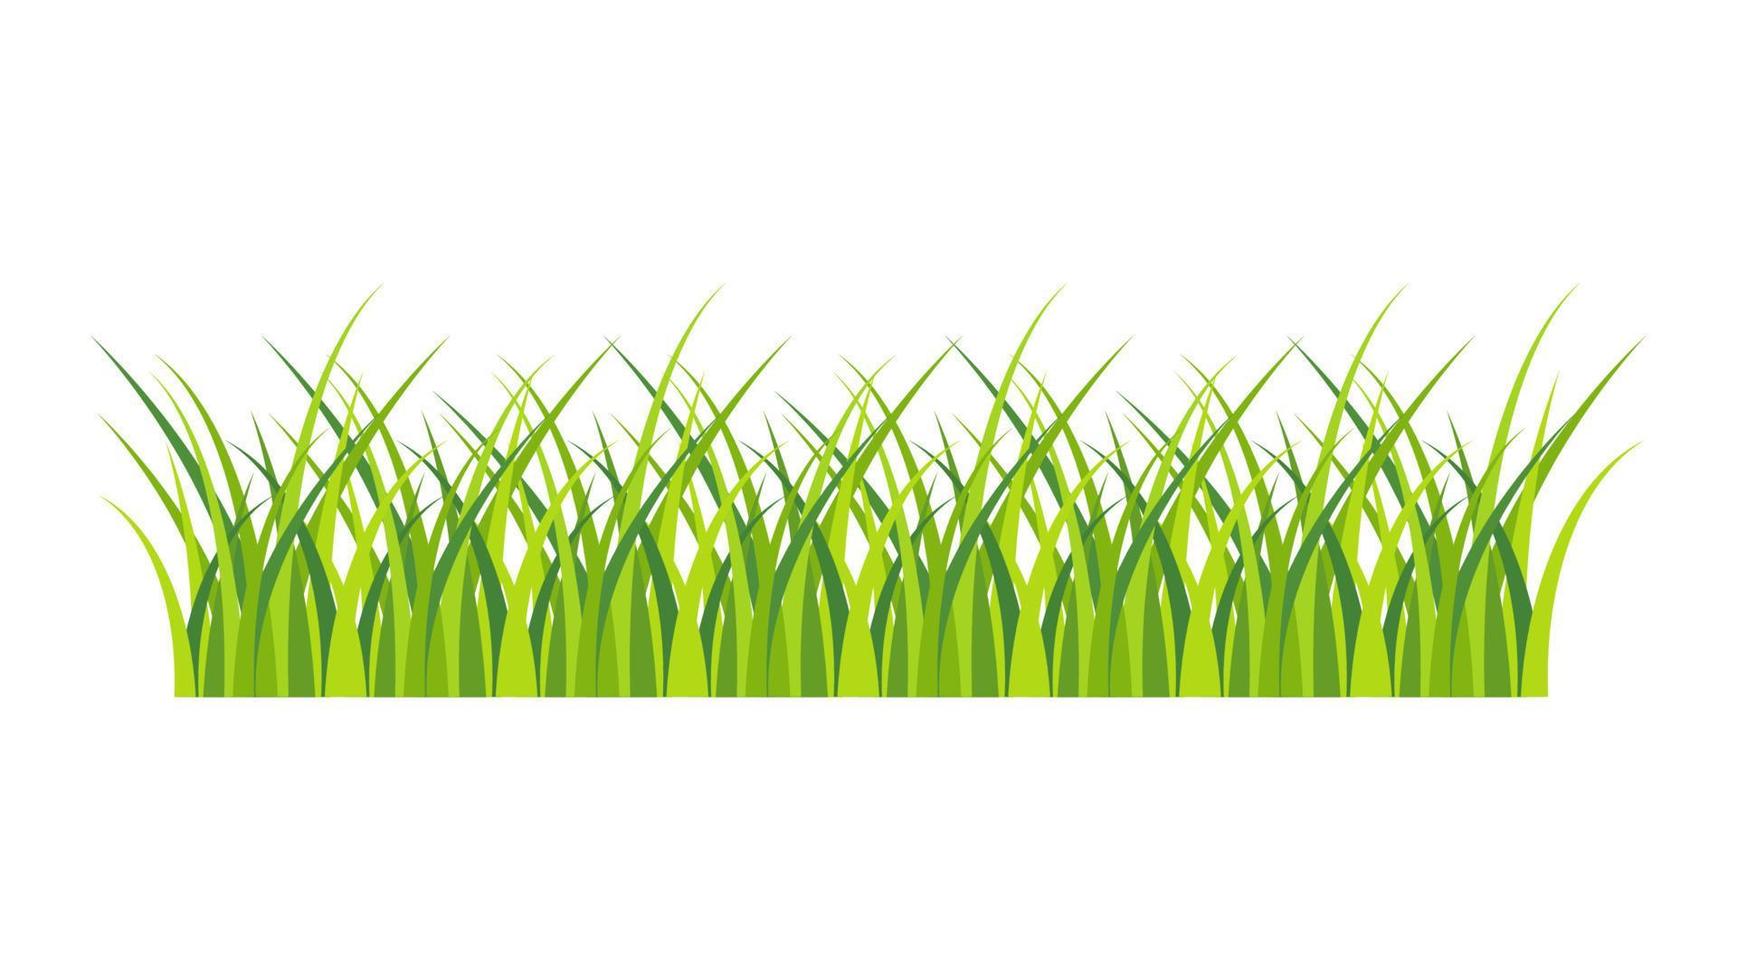 Grass banner vector isolated on white background